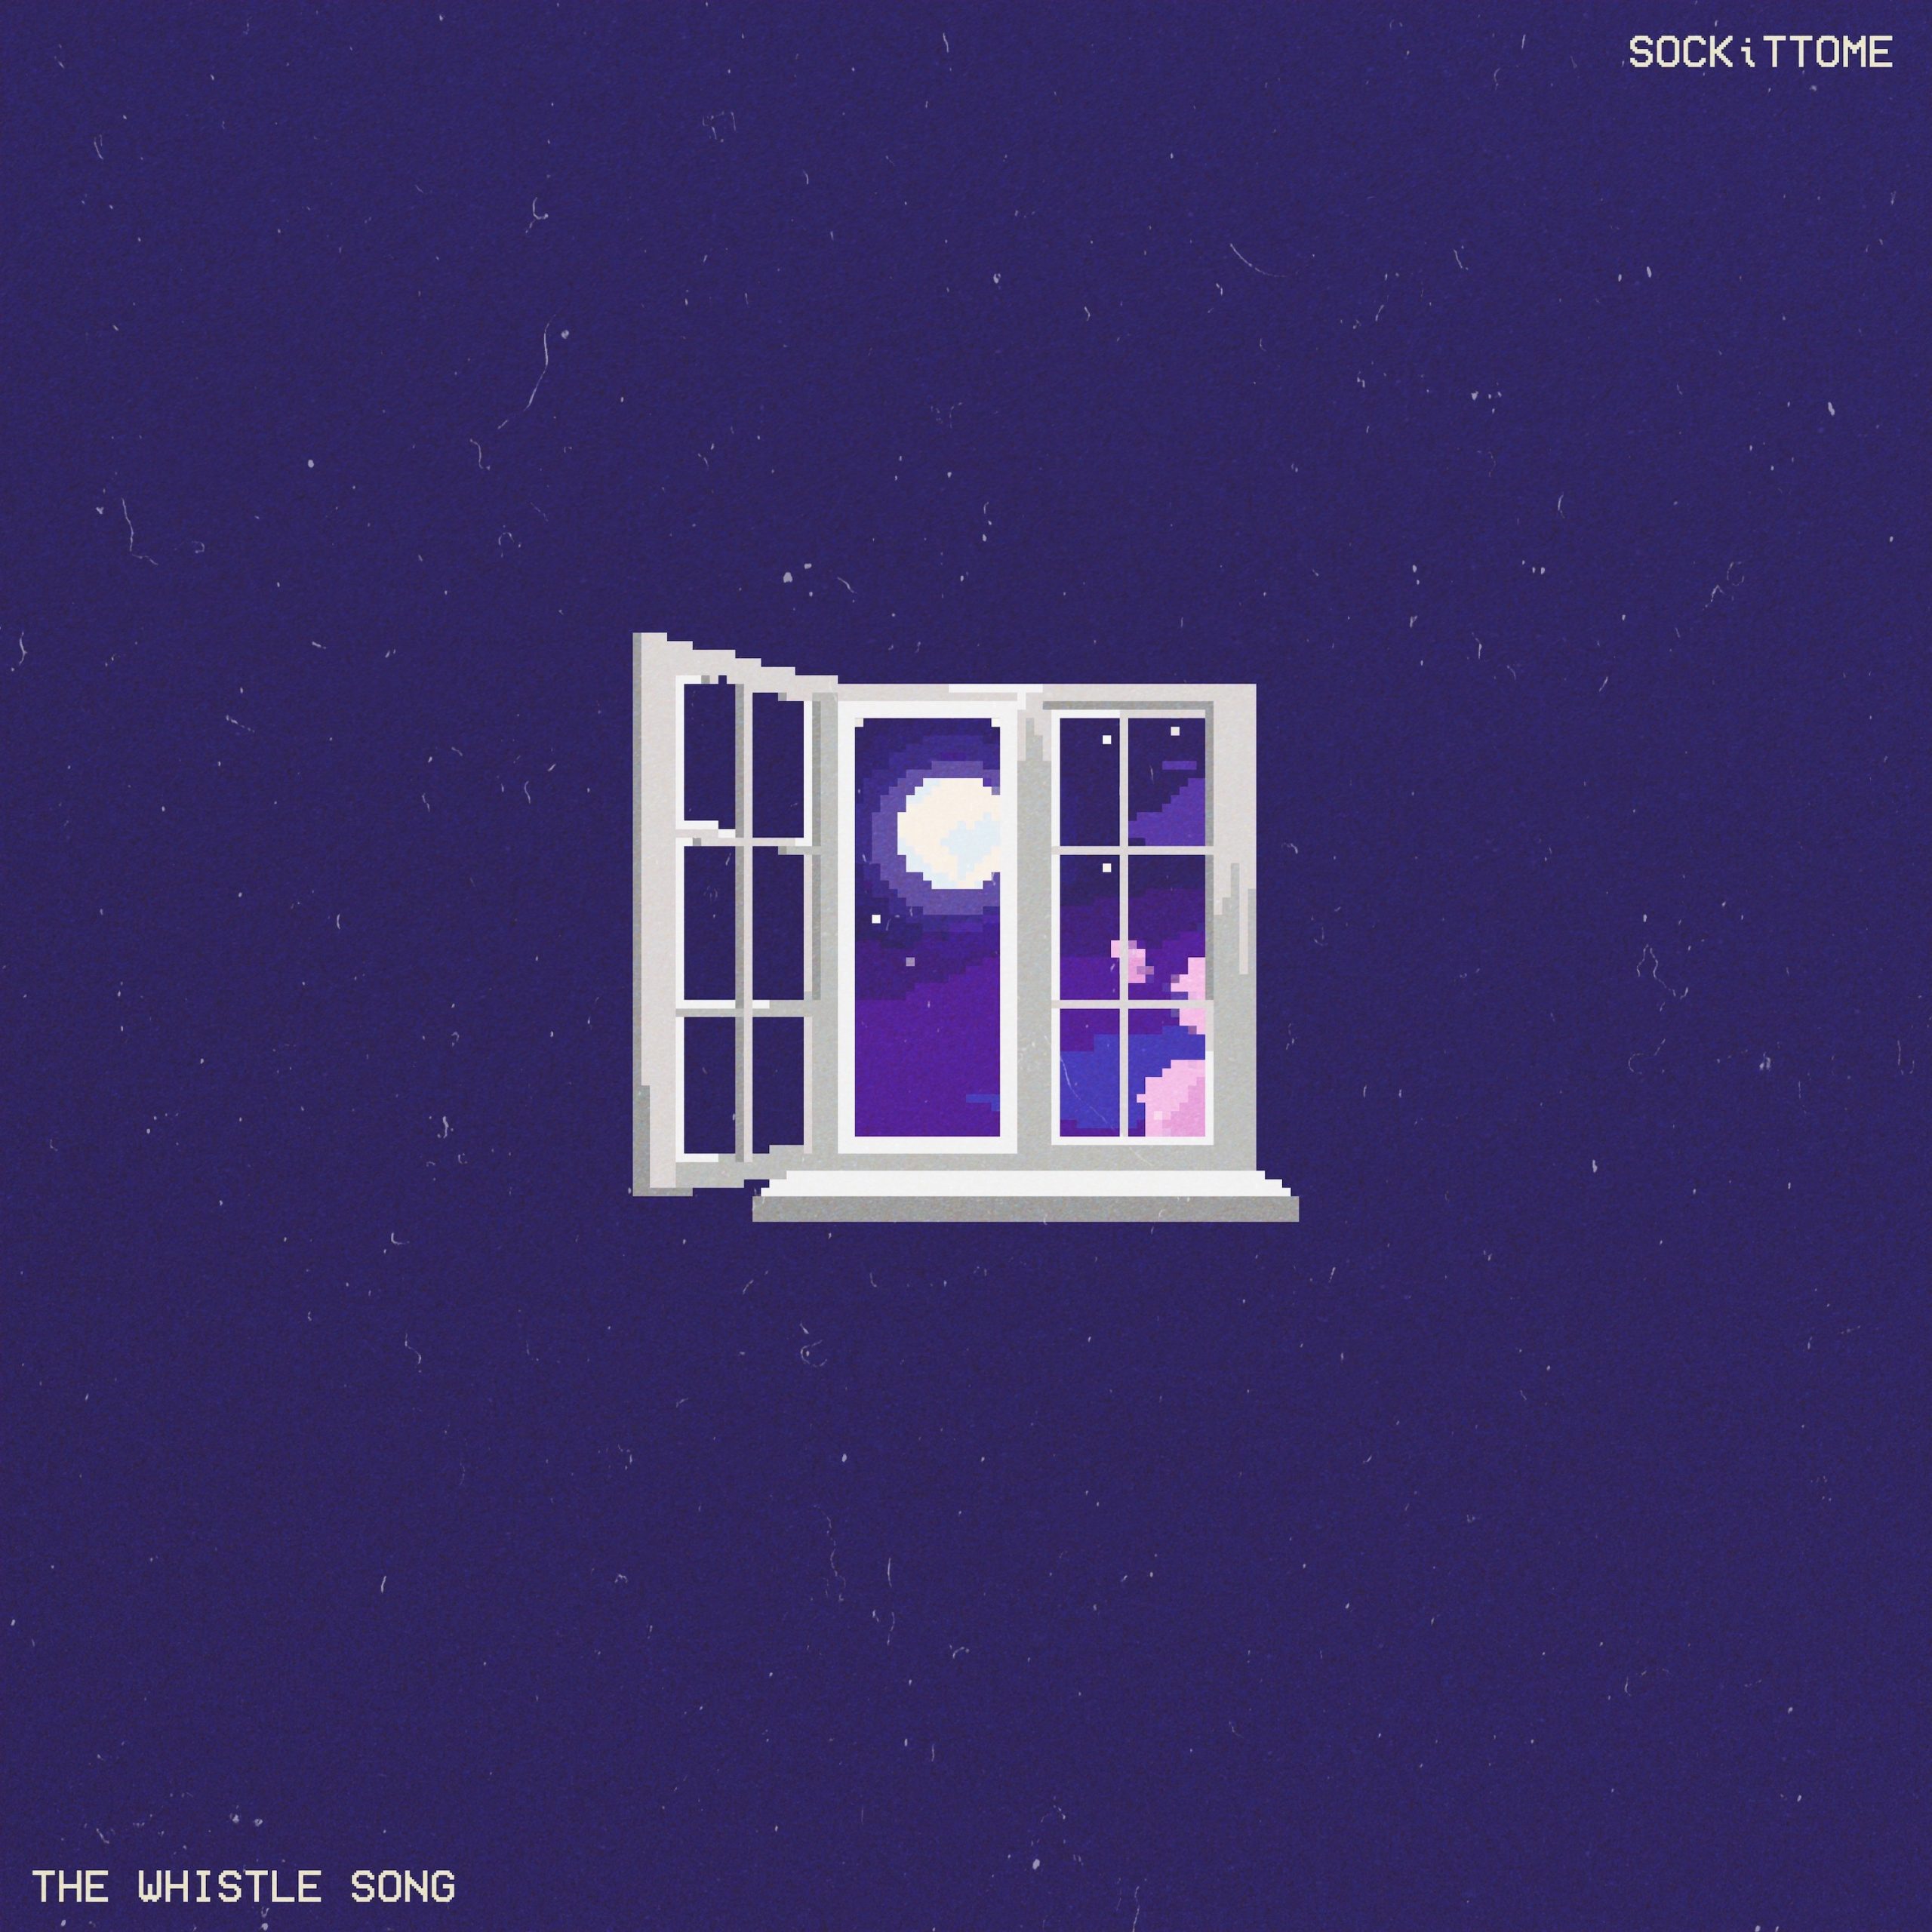 the whistle song - SOCKiTTOME - uk - indie - indie music - indie pop - new music - music blog - wolf in a suit - wolfinasuit - wolf in a suit blog - wolf in a suit music blog